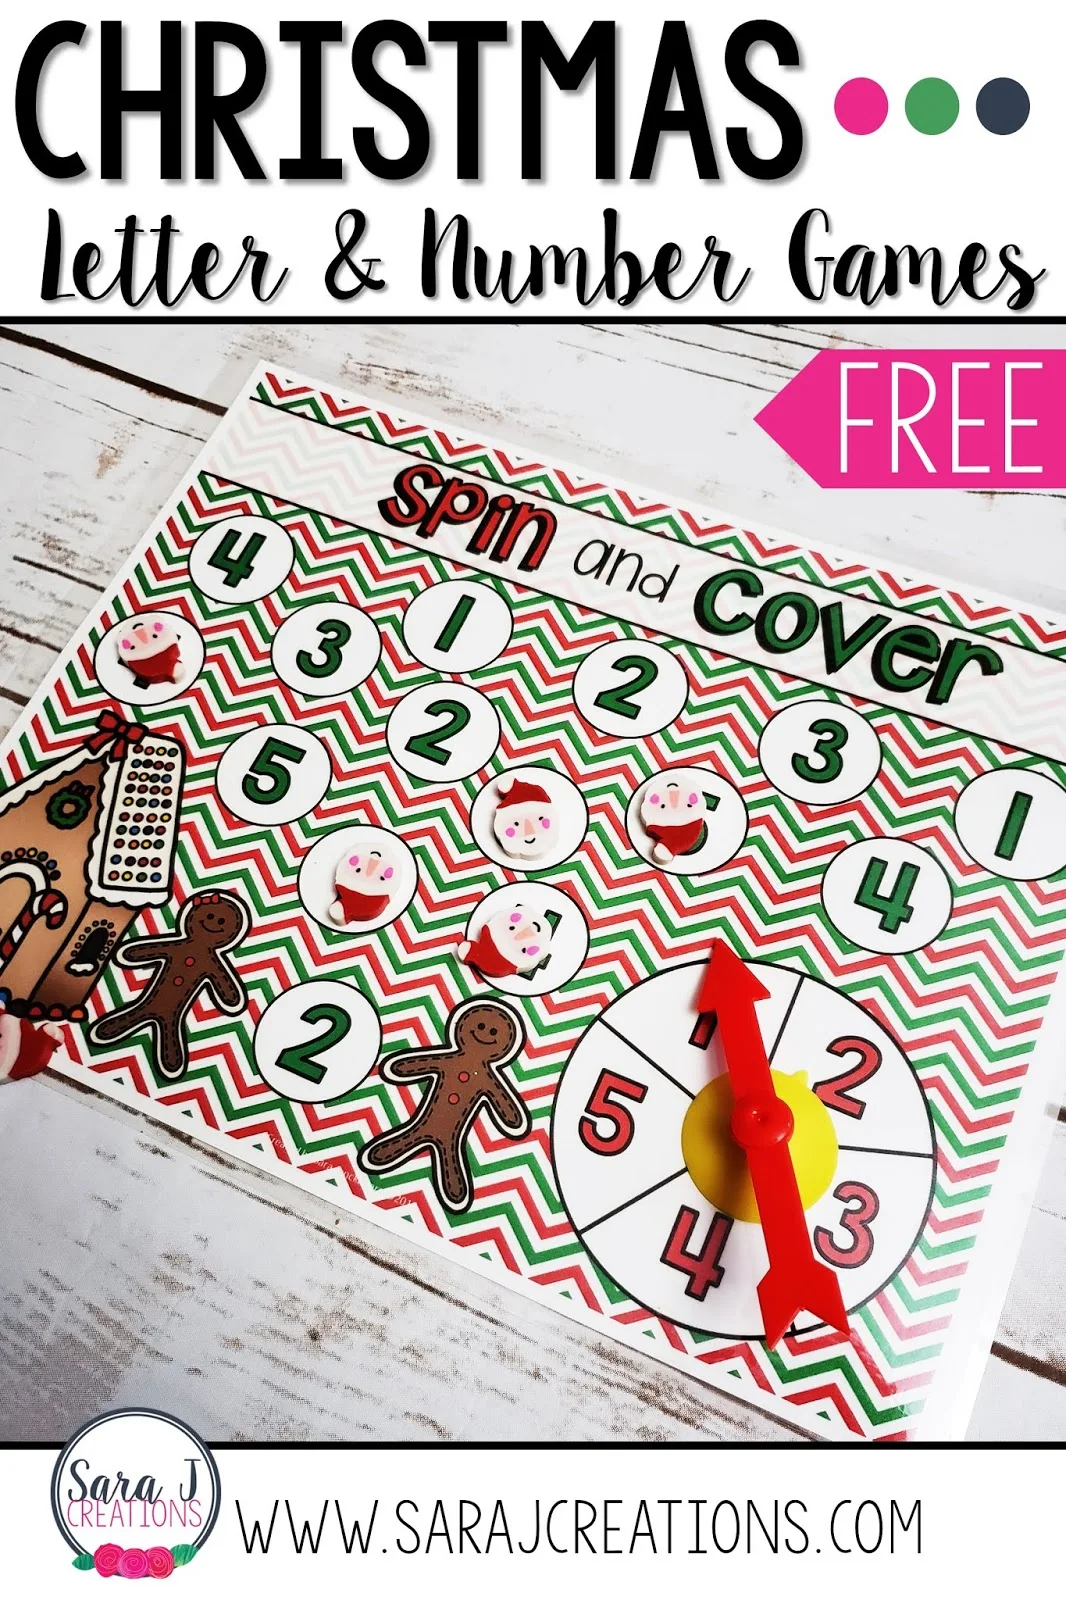 Free Christmas alphabet and number practice games perfect for preschool or kindergarten in the month of December